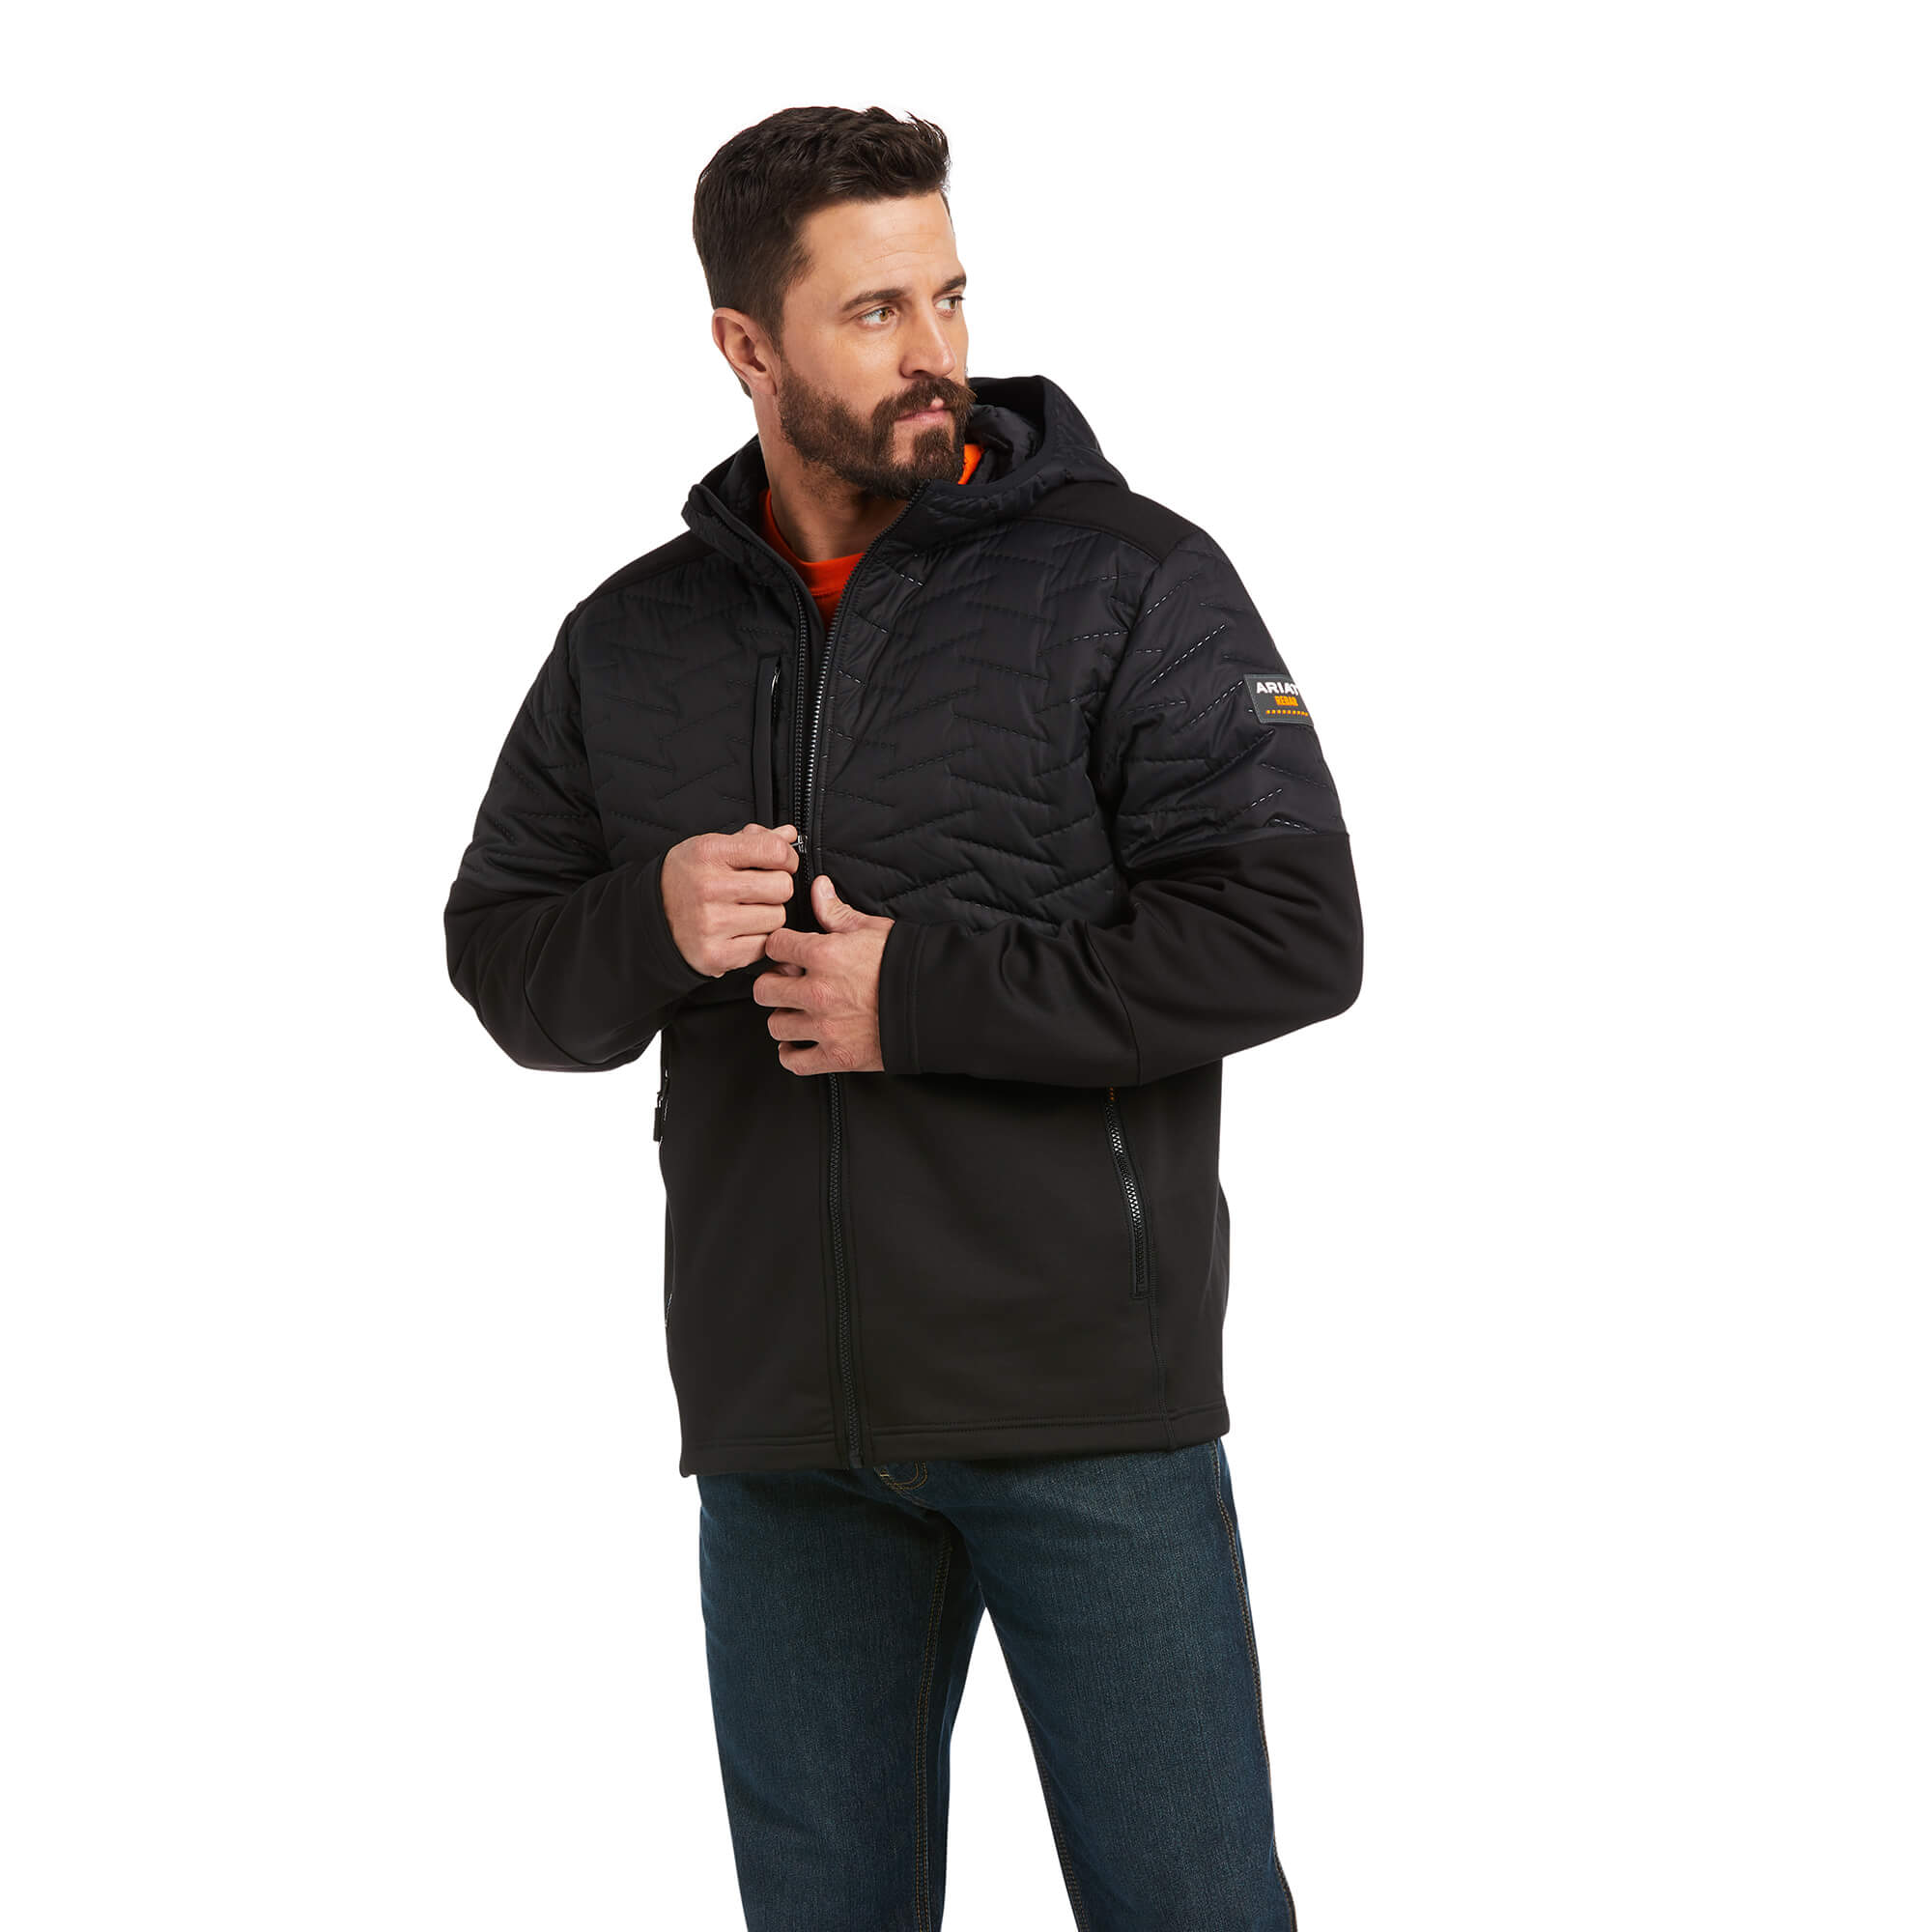 Men's Rebar Cloud 9 Insulated Jacket in Black, Size: Large_Tall by Ariat